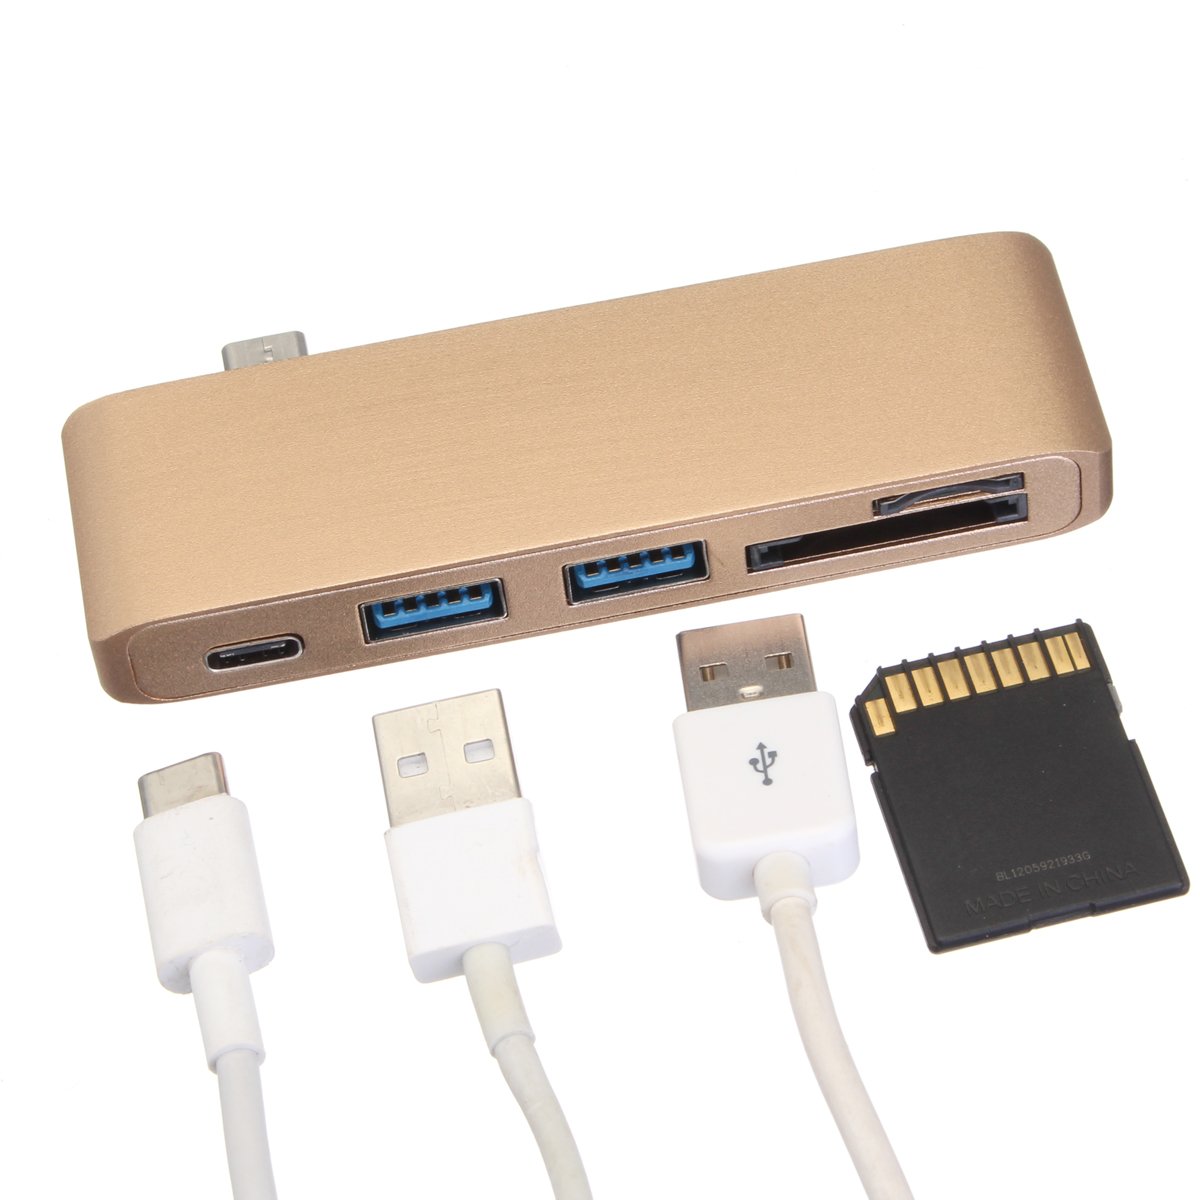 Multifunction USB Hub Type-C to Type-C USB 3.0 2Ports TF SD Card Reader for Laptop PC 2